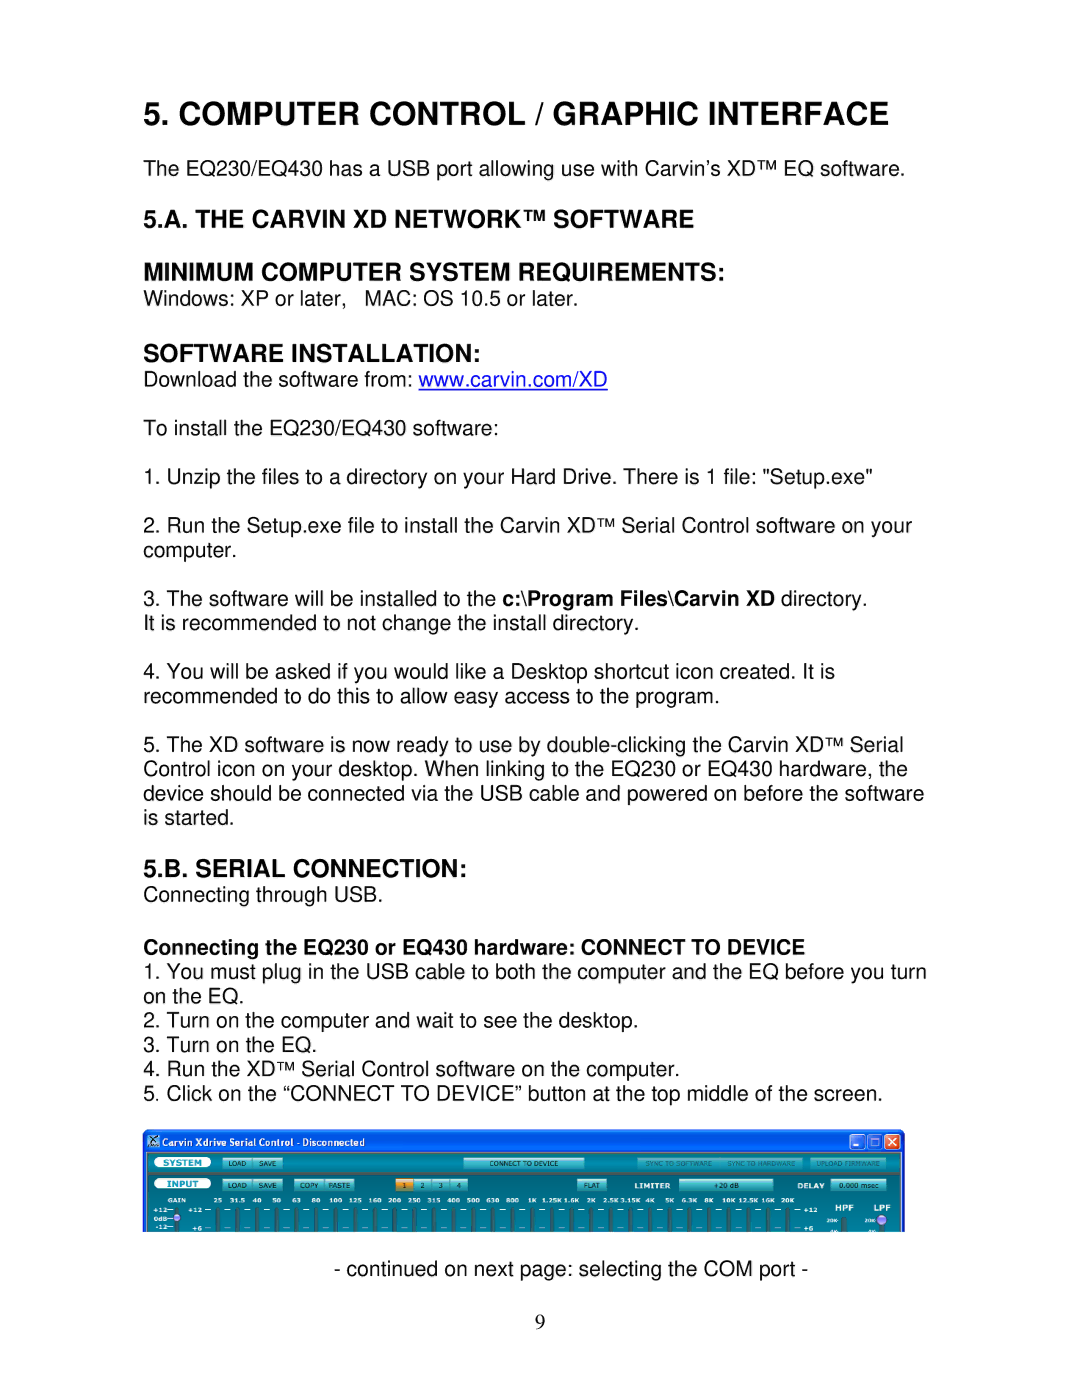 Carvin manual Software Installation, Serial Connection, Connecting the EQ230 or EQ430 hardware Connect to Device 